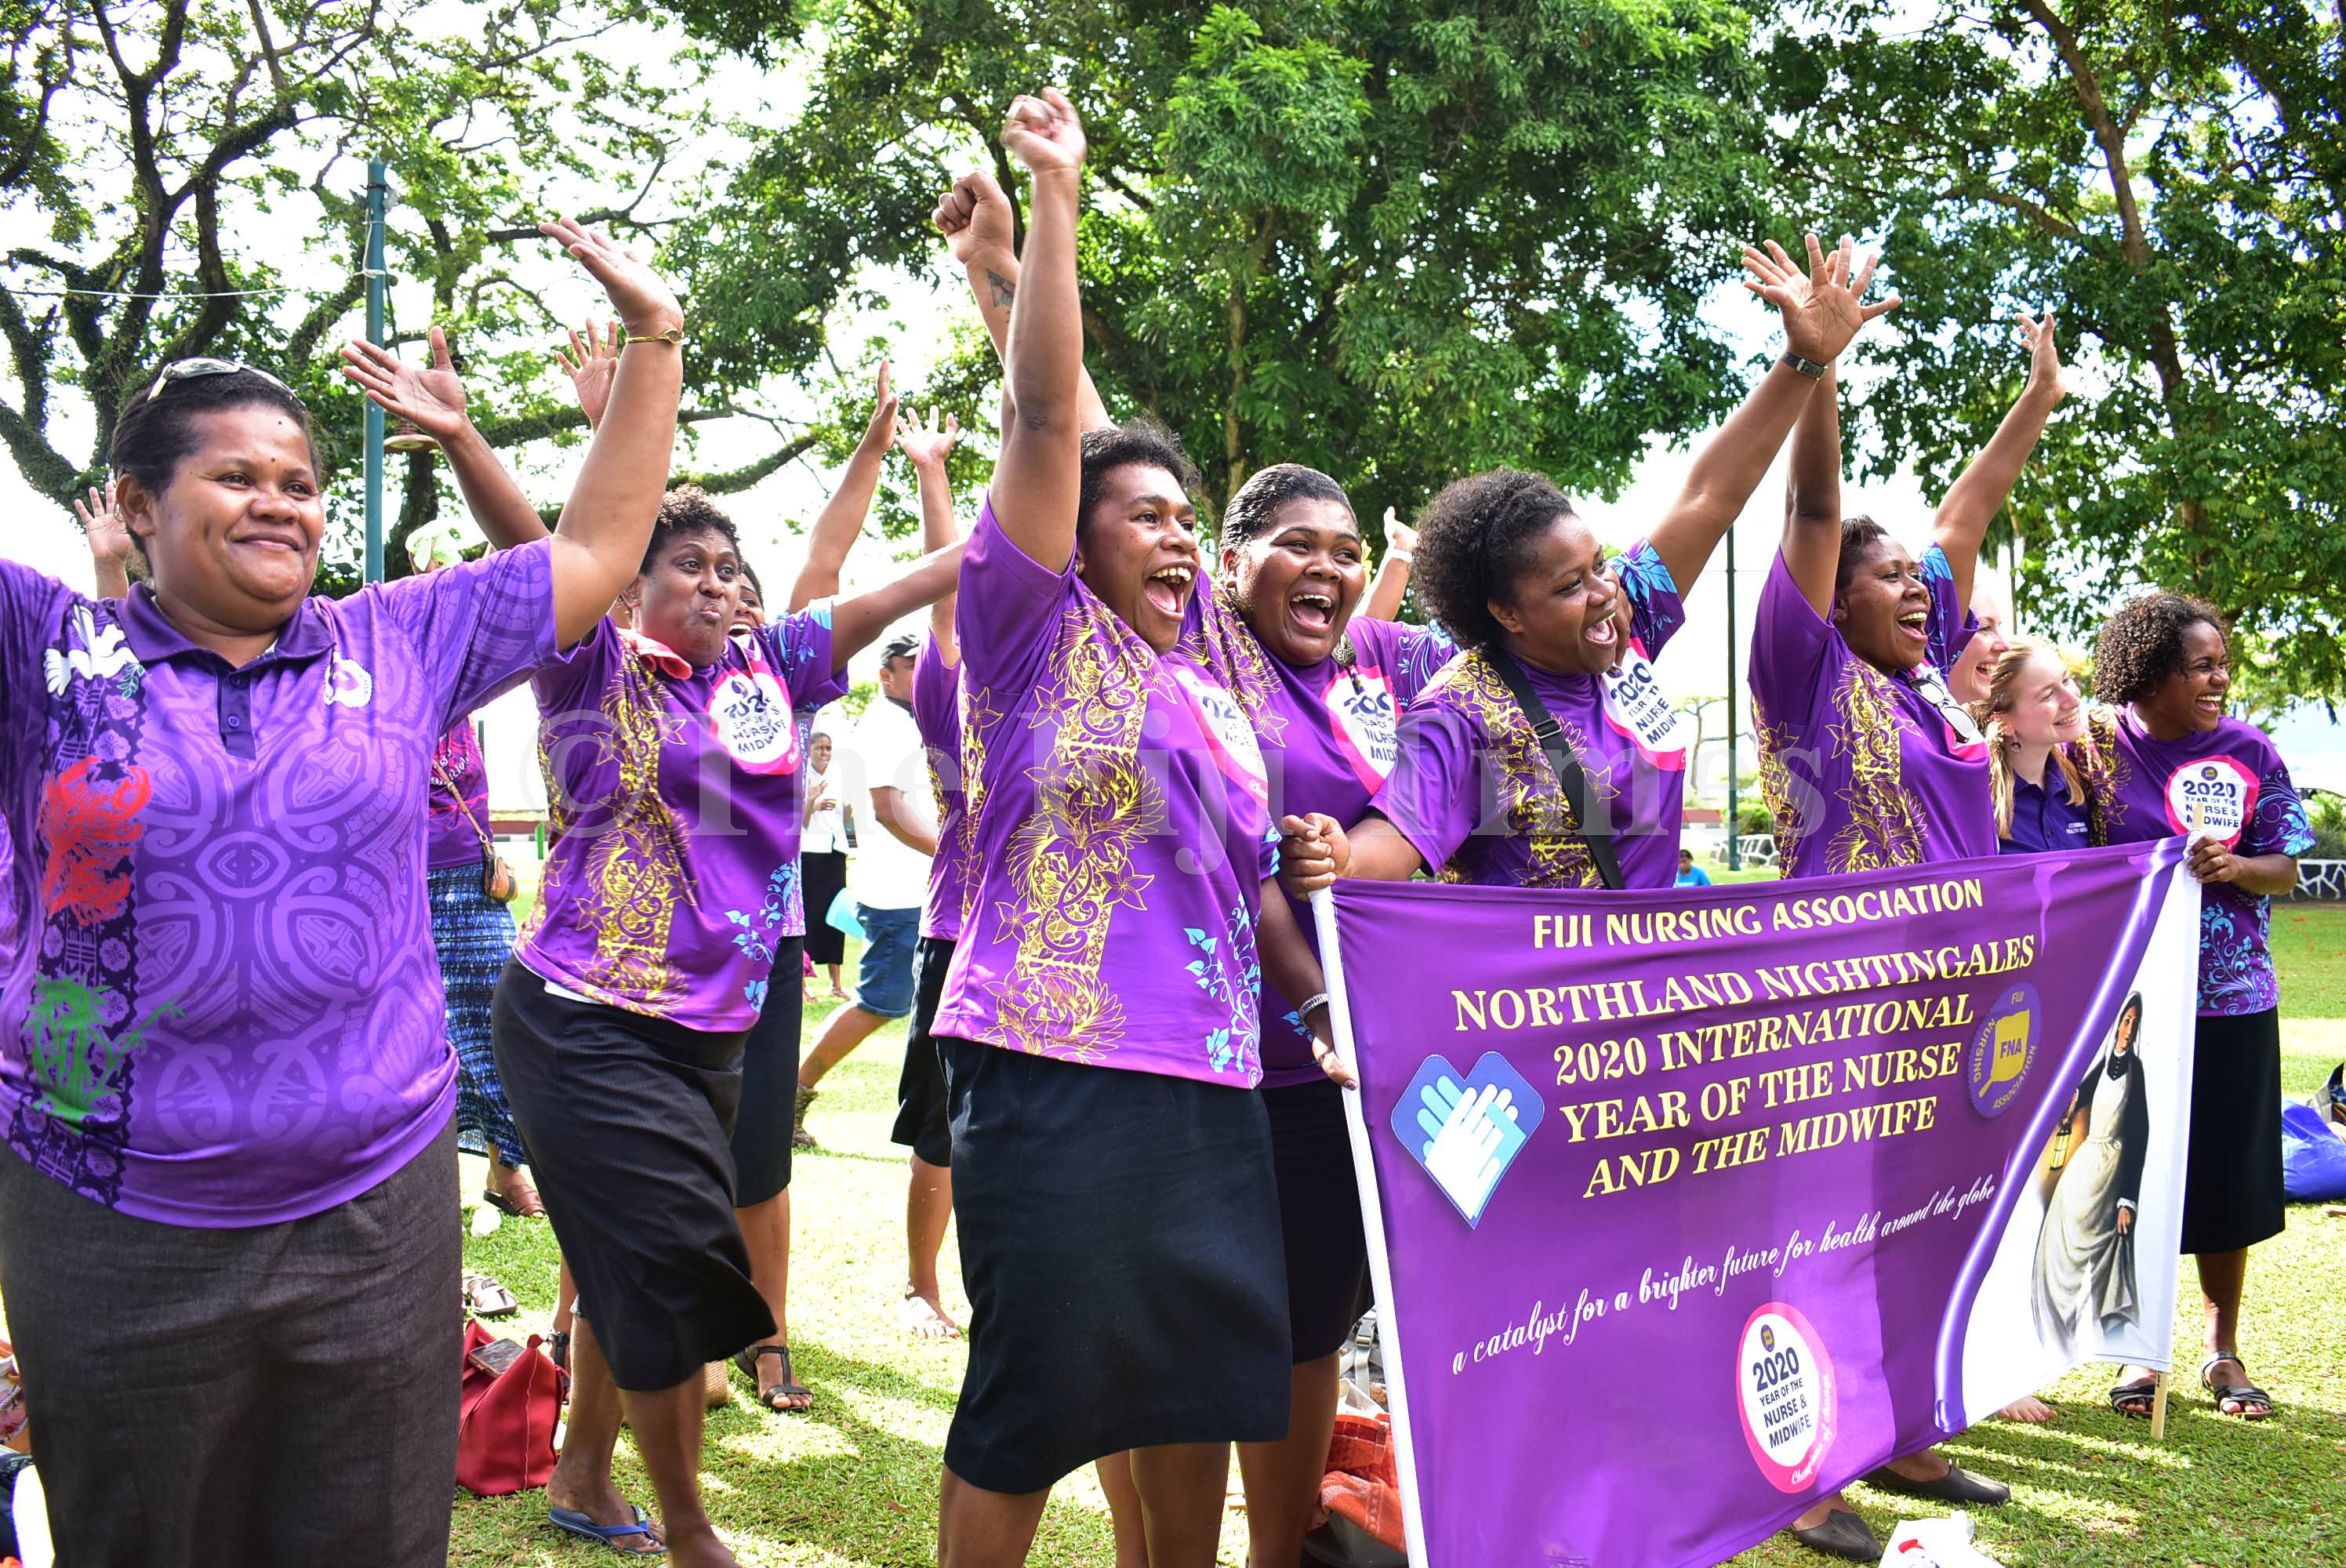 More pay for nurses - The Fiji Times